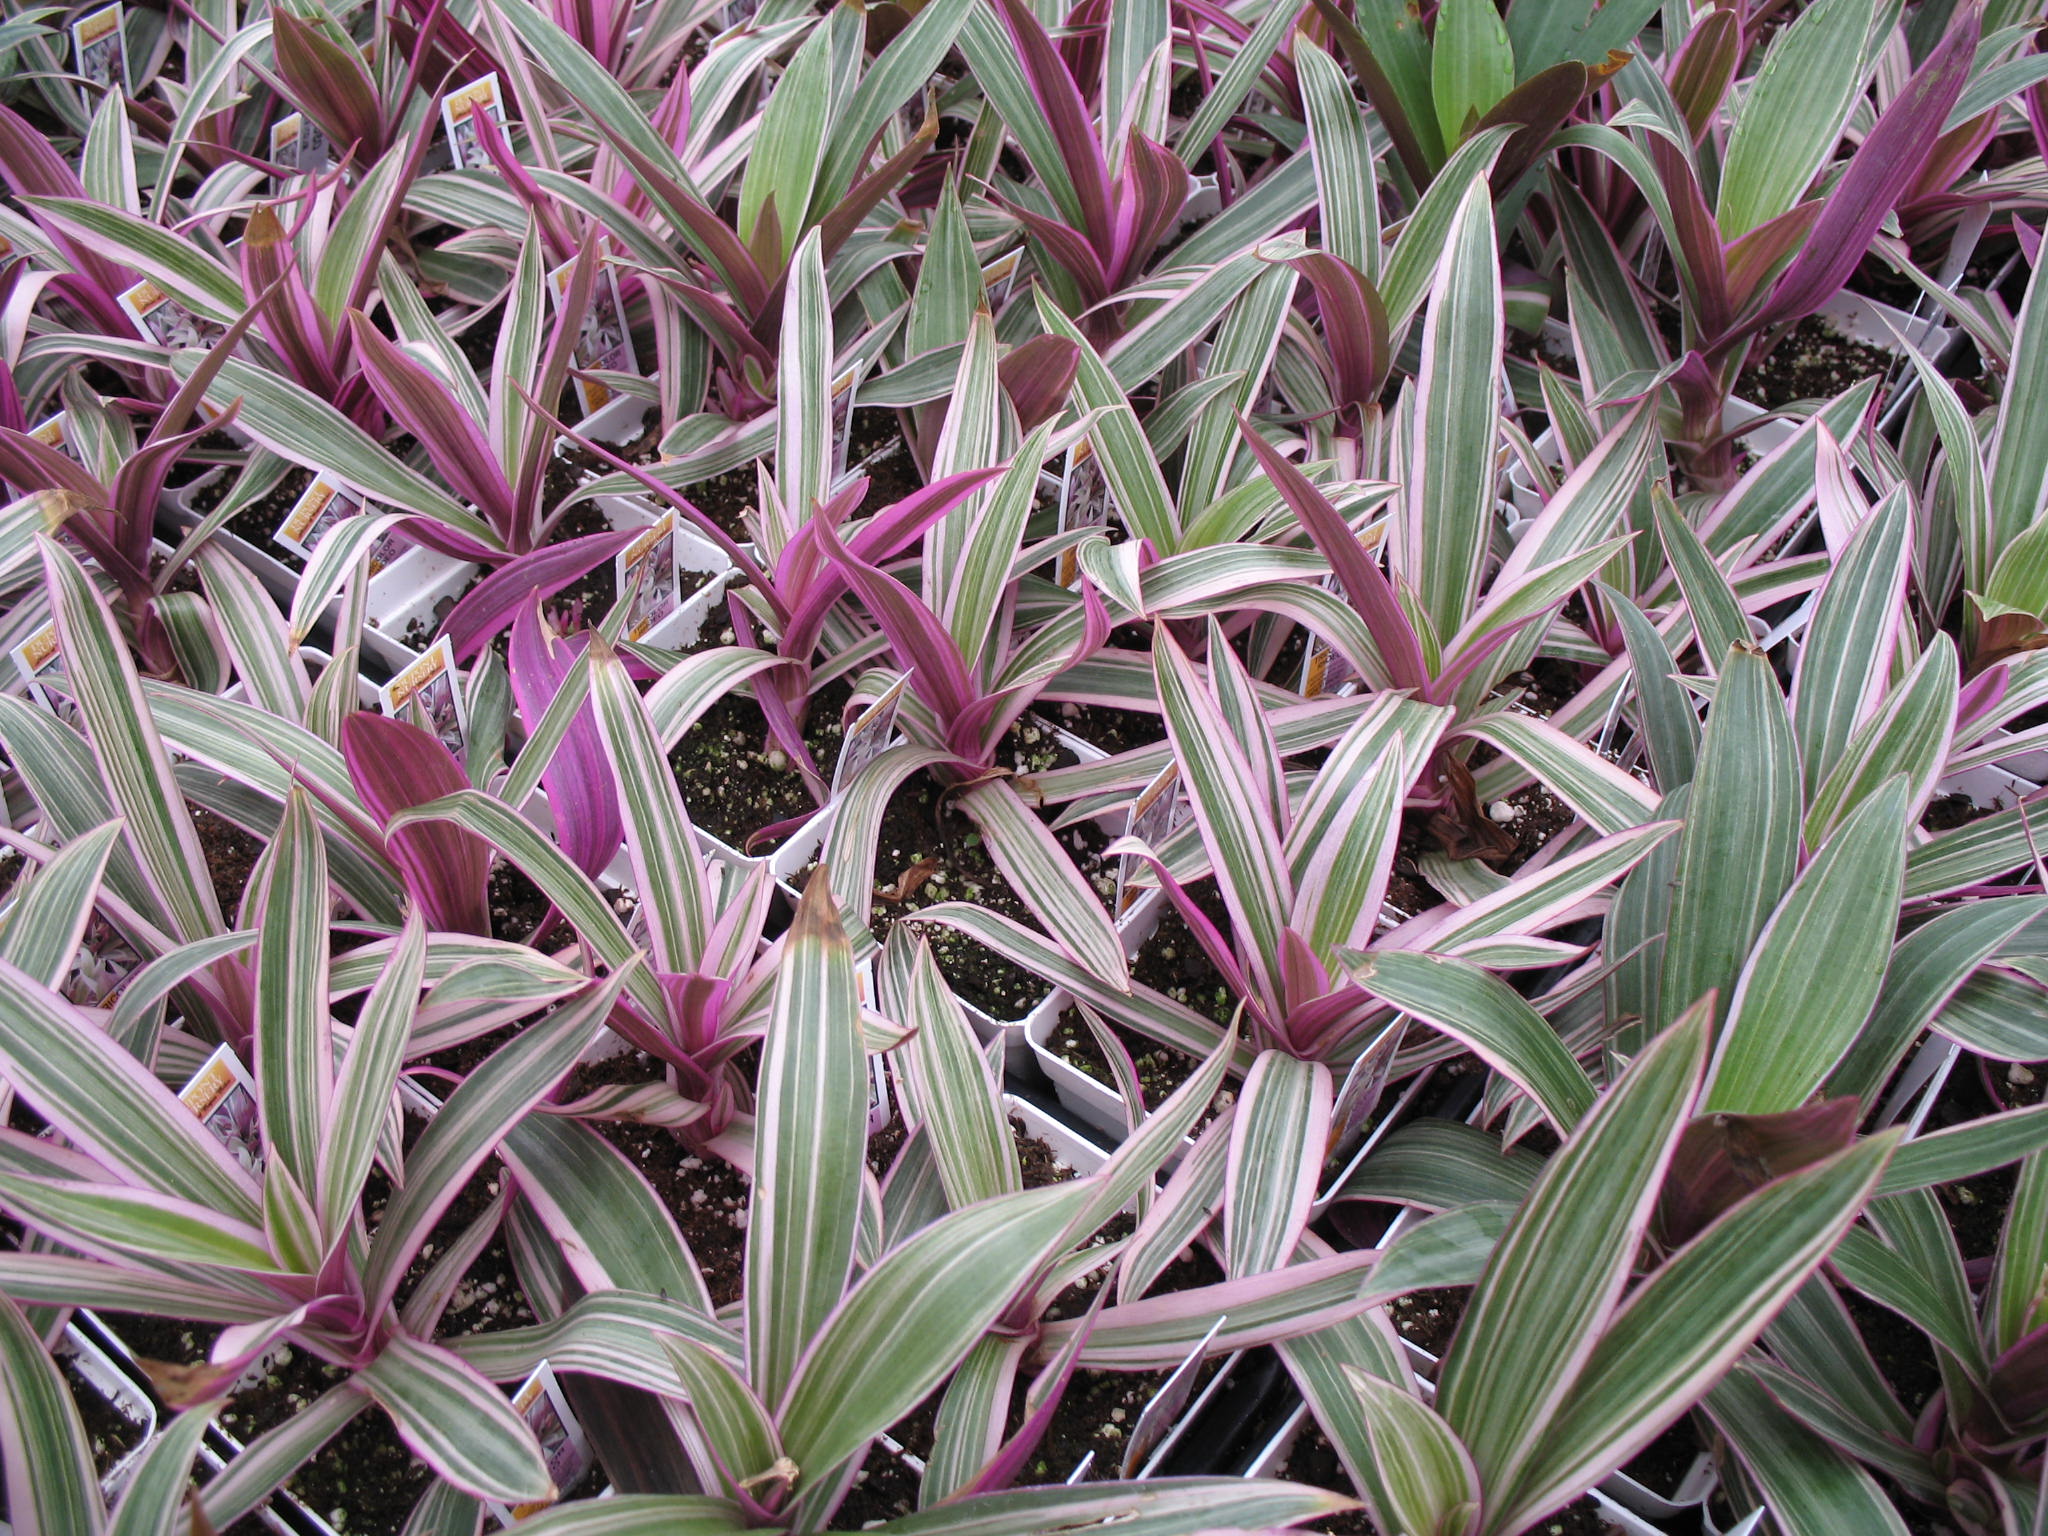 Rhoeo spathacea 'Tricolor' / Moses-in-the-Boat